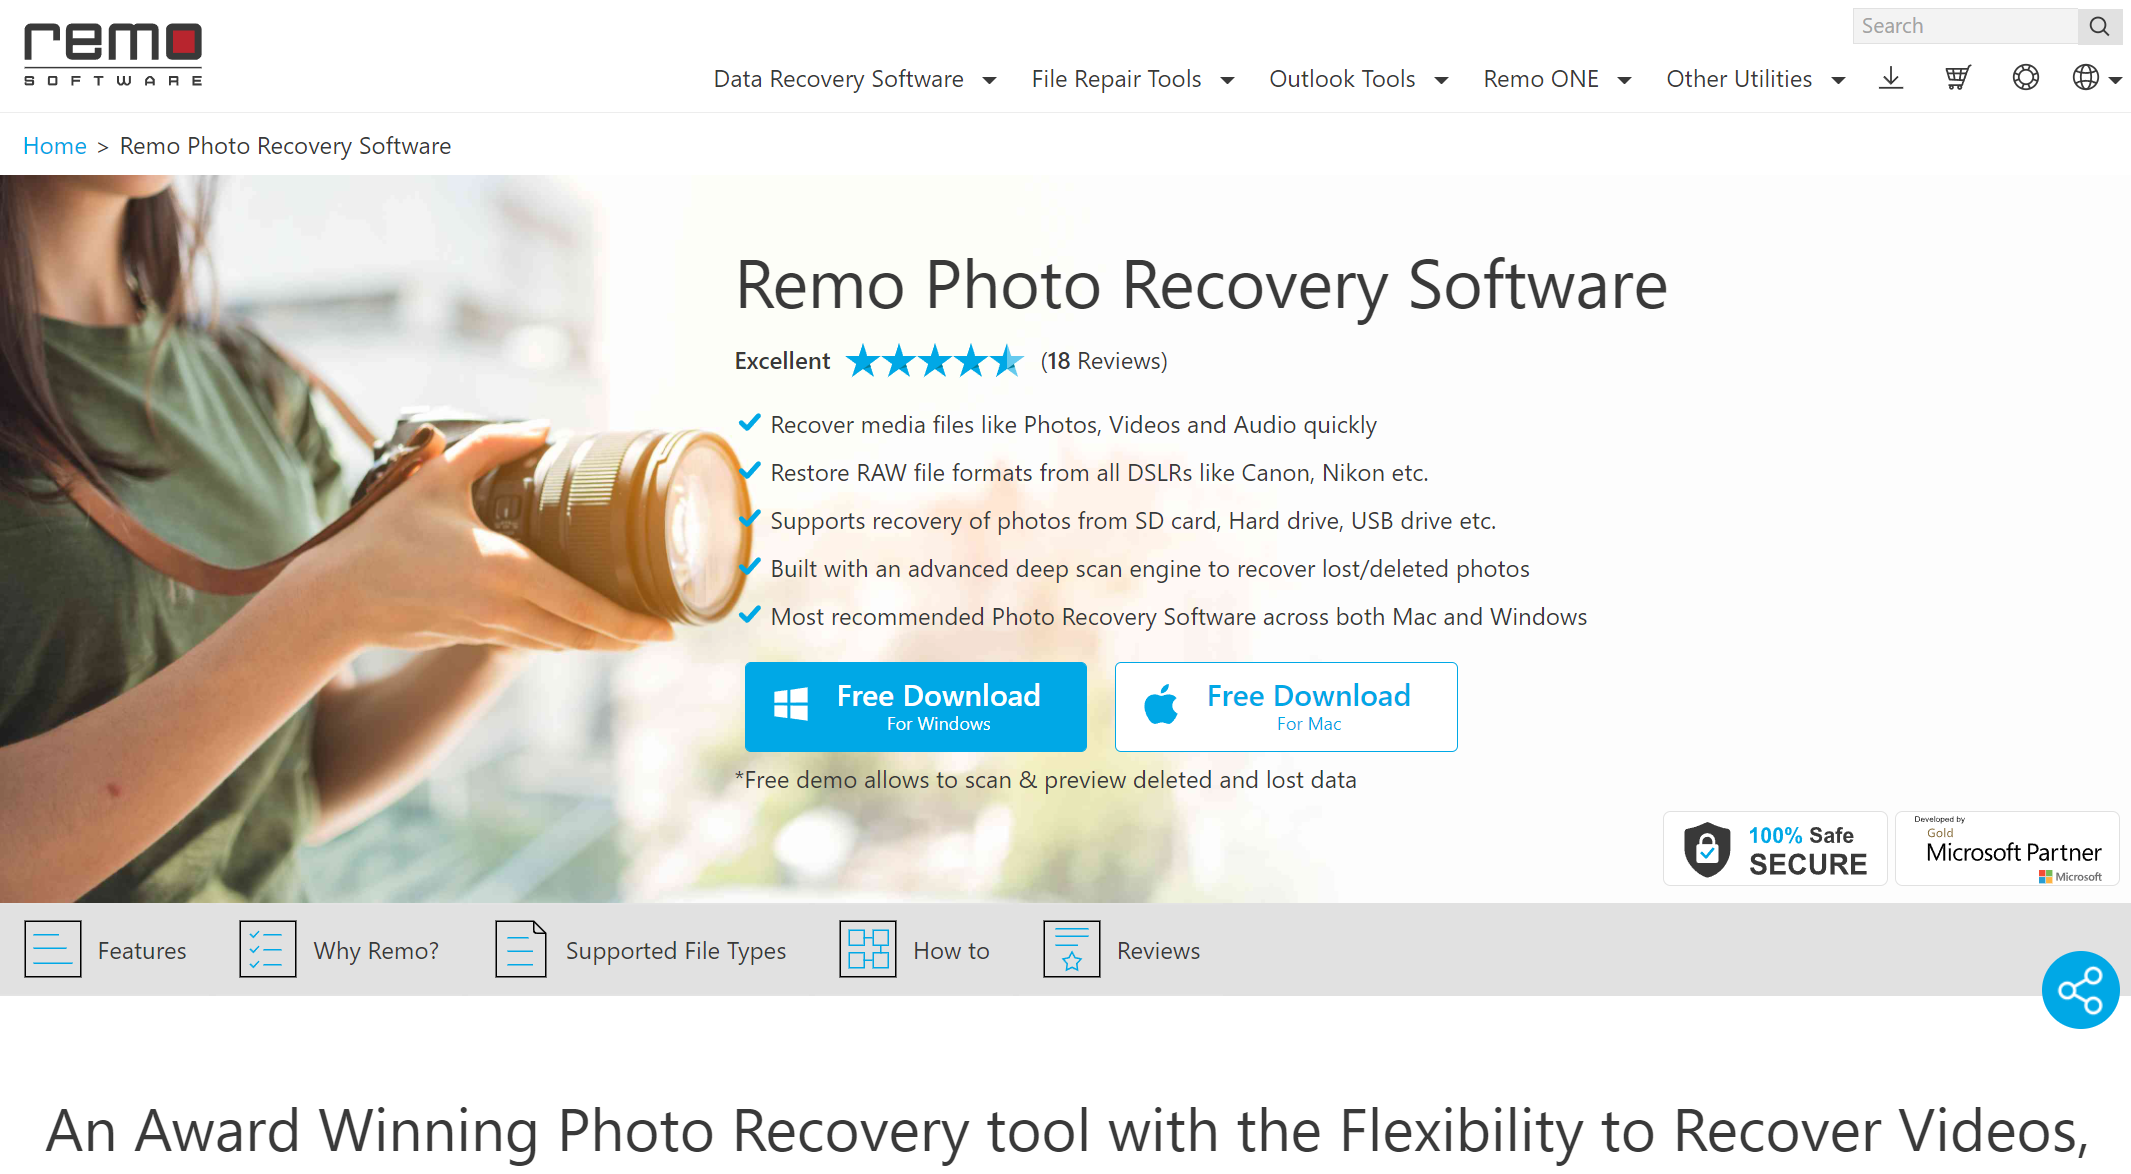 Remo Photo Recovery Software